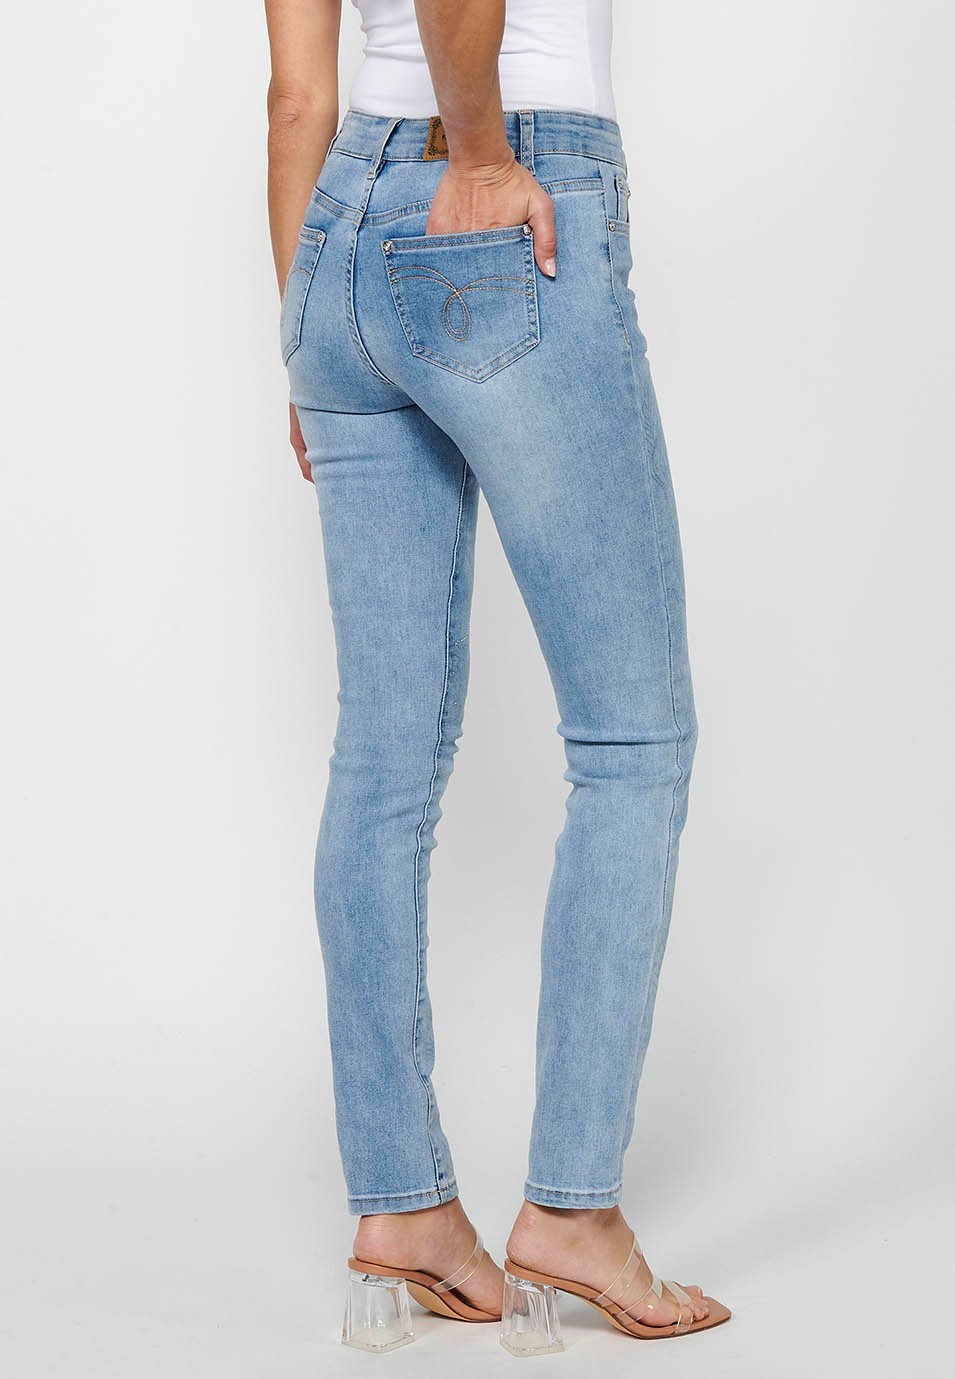 Long slim denim pants with floral details and front closure with zipper and button in Light Blue for Women 6